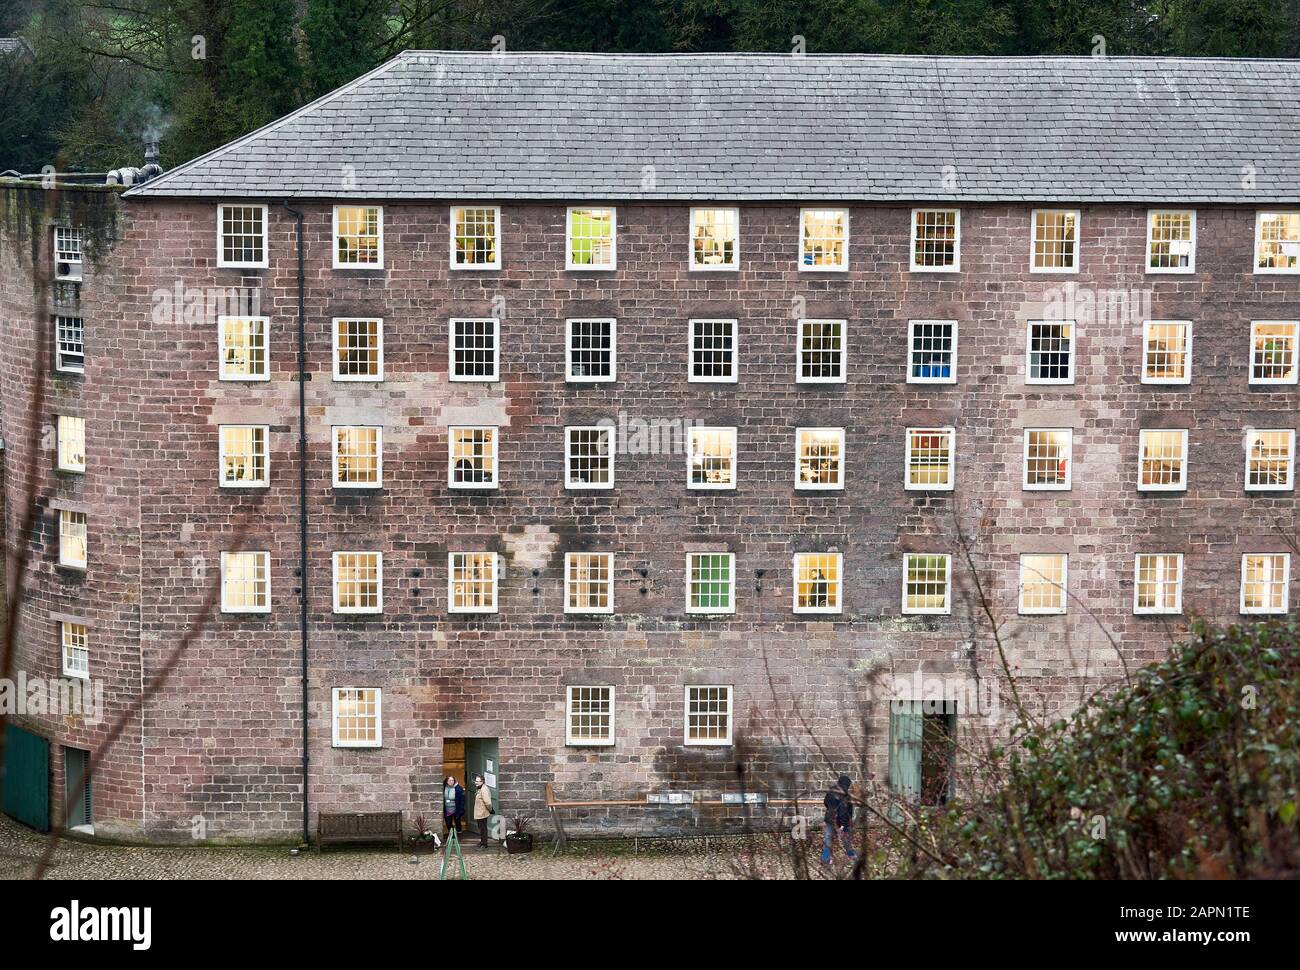 Cromford cotton spinning water powered mills, Sir Richard Arkwright’s first mill complex, birthplace of the factory system, and a UNESCO World Heritag Stock Photo